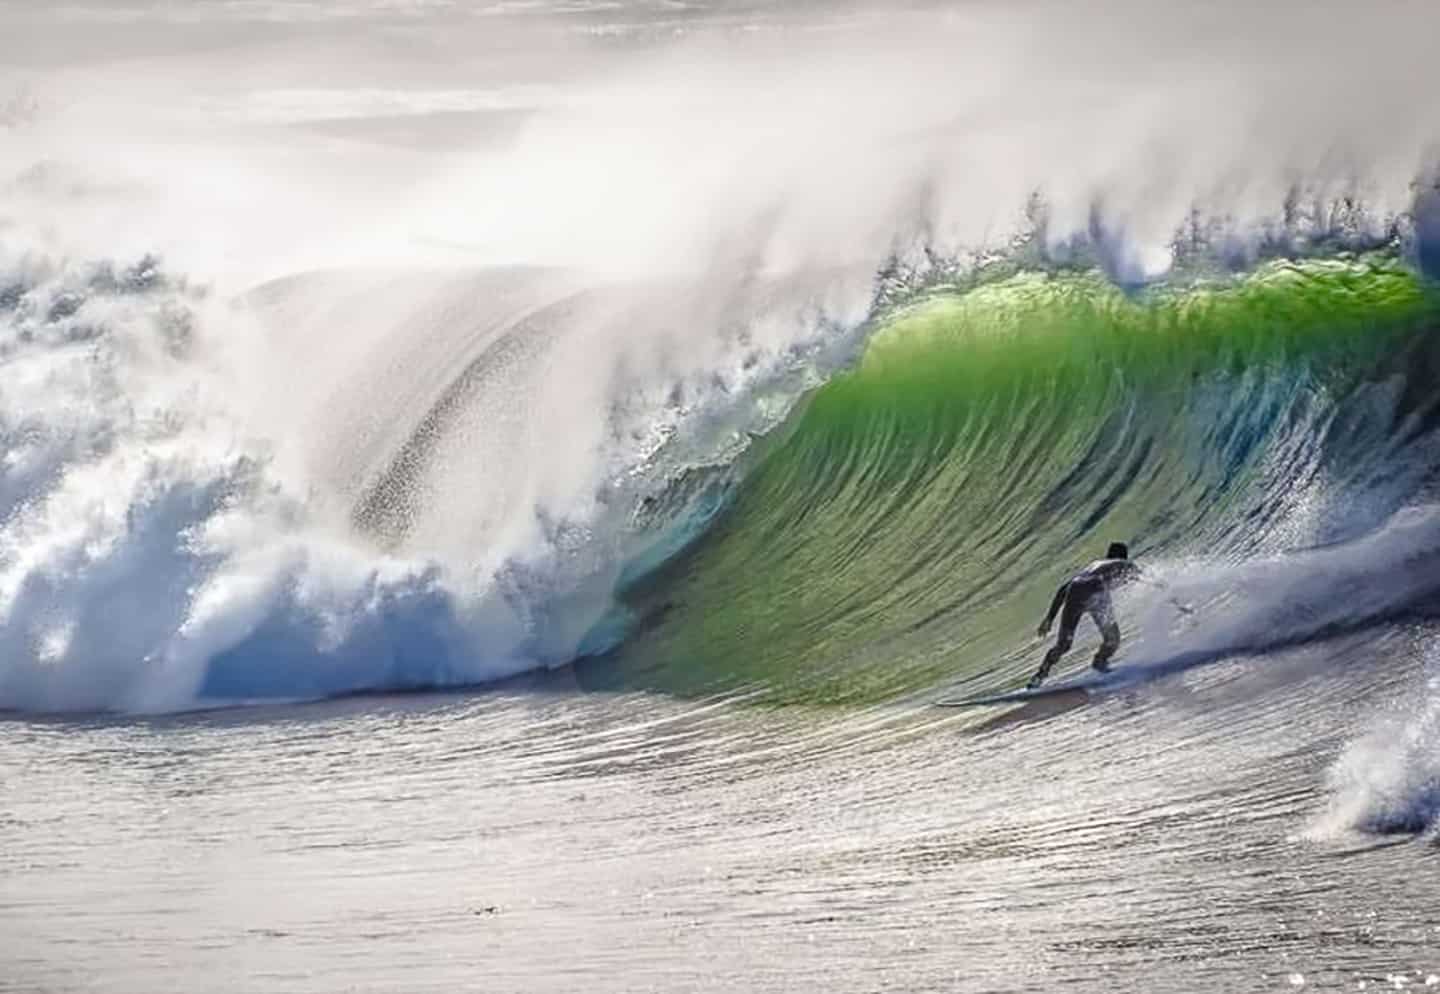 Surfing large wave